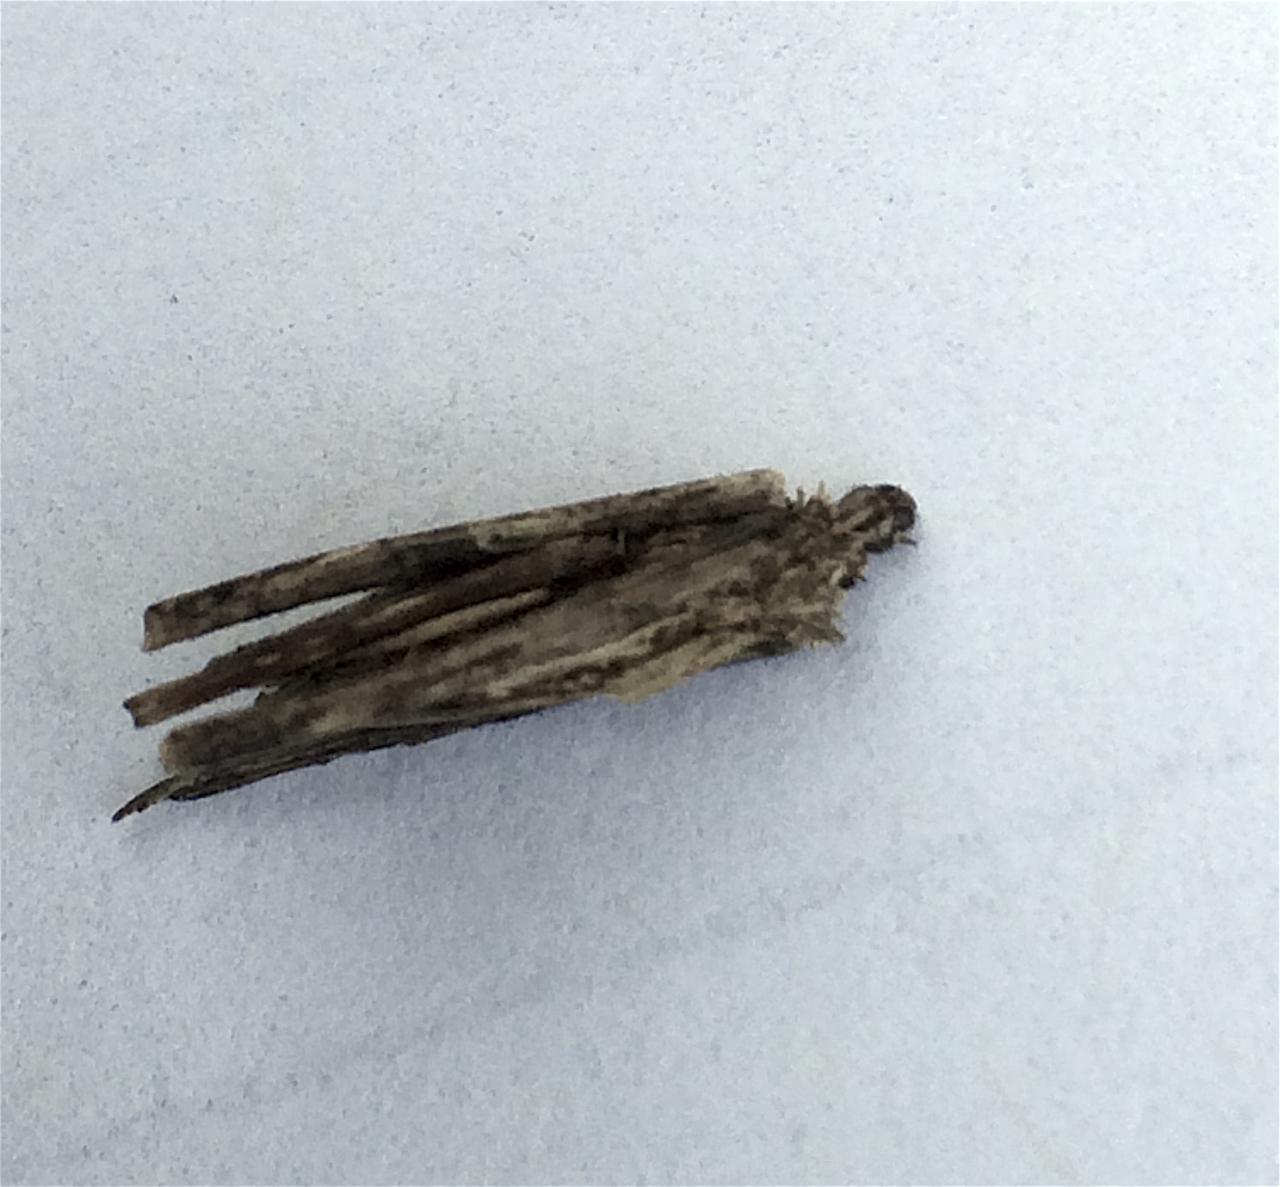 Bagworm larva on side of house